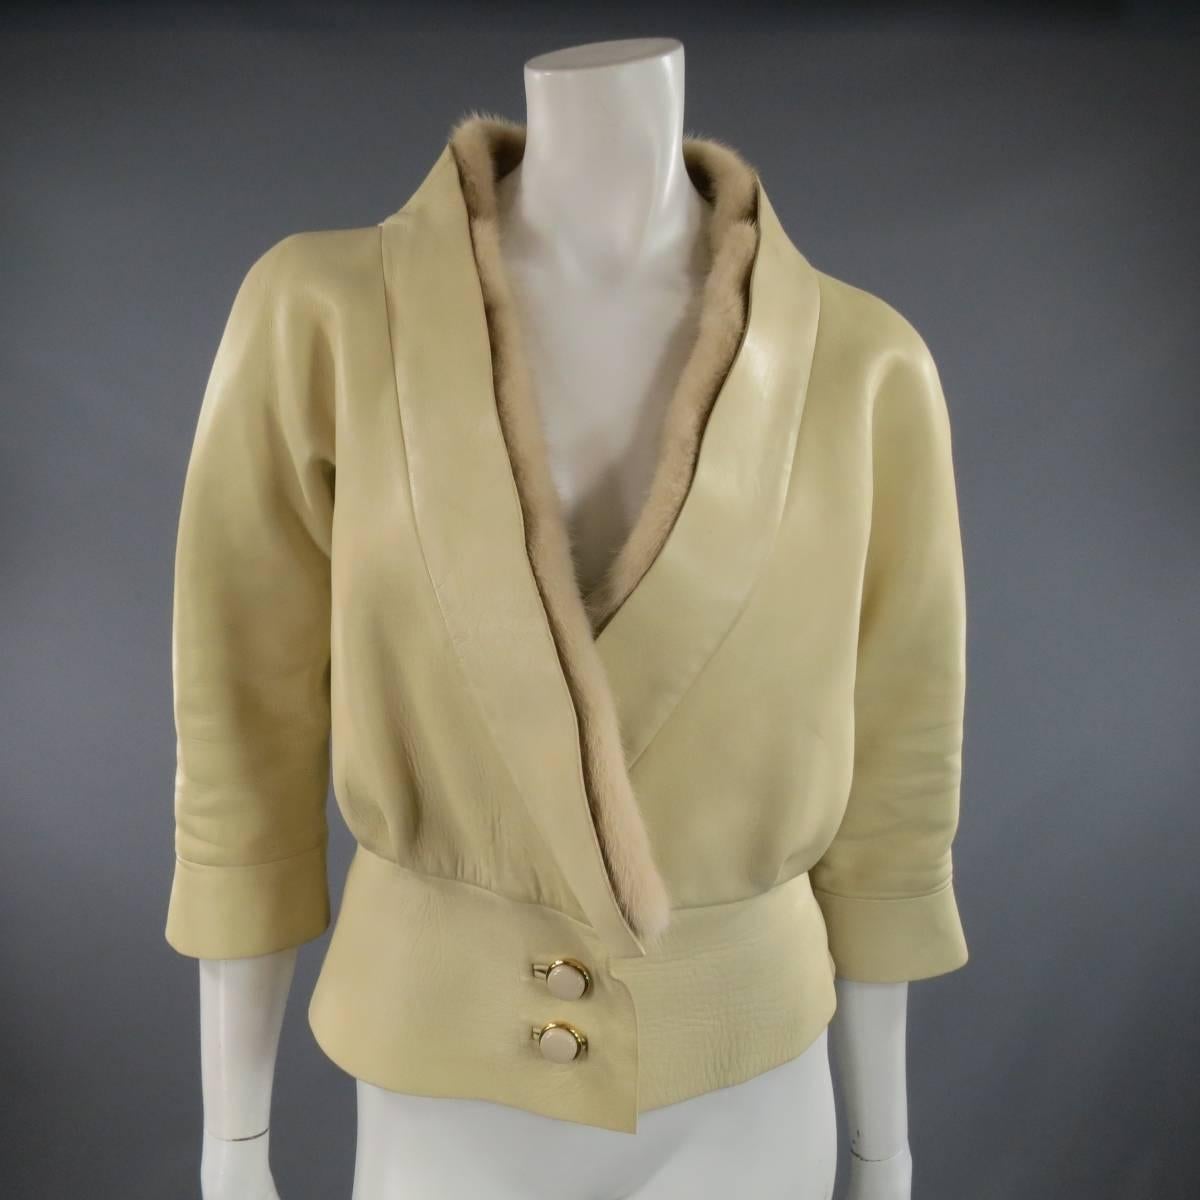 This lovely MARC JACOBS cropped jacket comes in tan beige smooth leather with three quarter sleeves, thick waist band with white button closure, tied leather belt, and tan mink fur collar. Marks throughout leather shown in detail shots. Made in